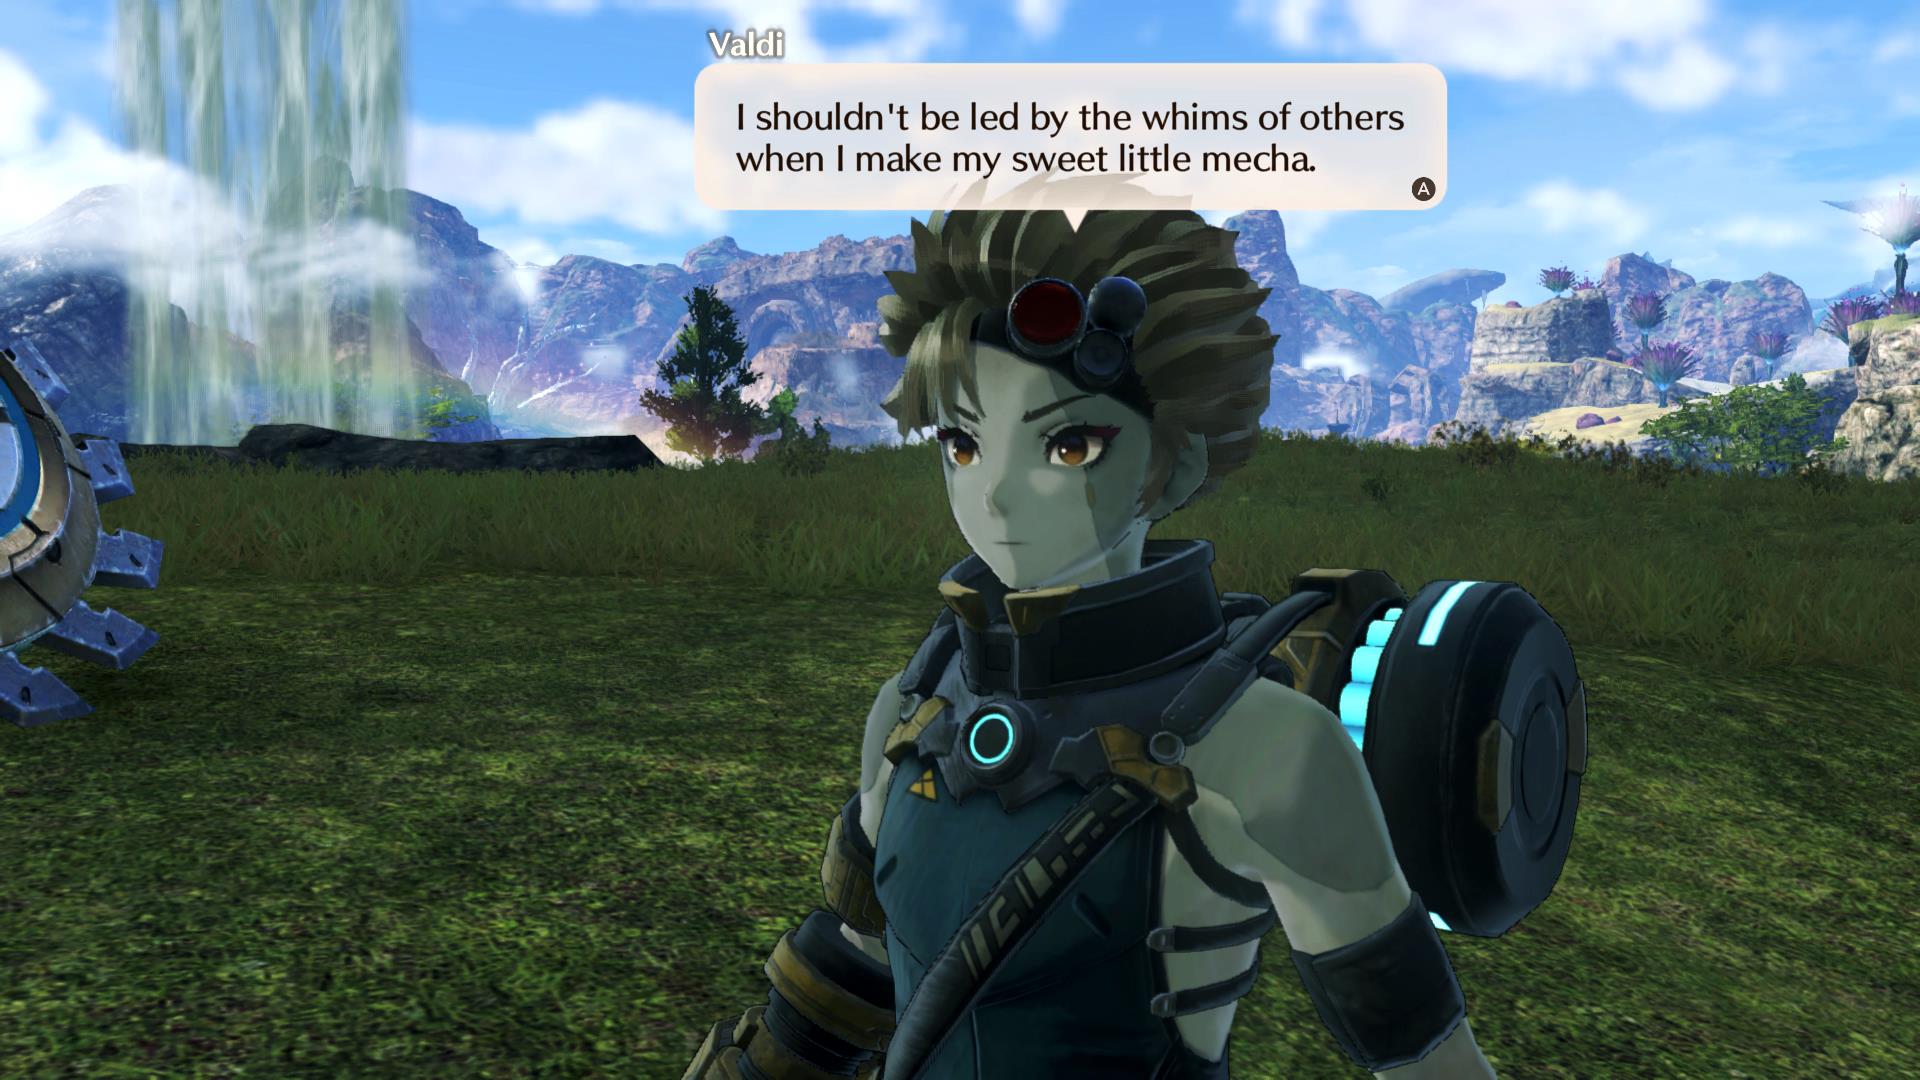 Xenoblade Chronicles 3: Meet the main characters